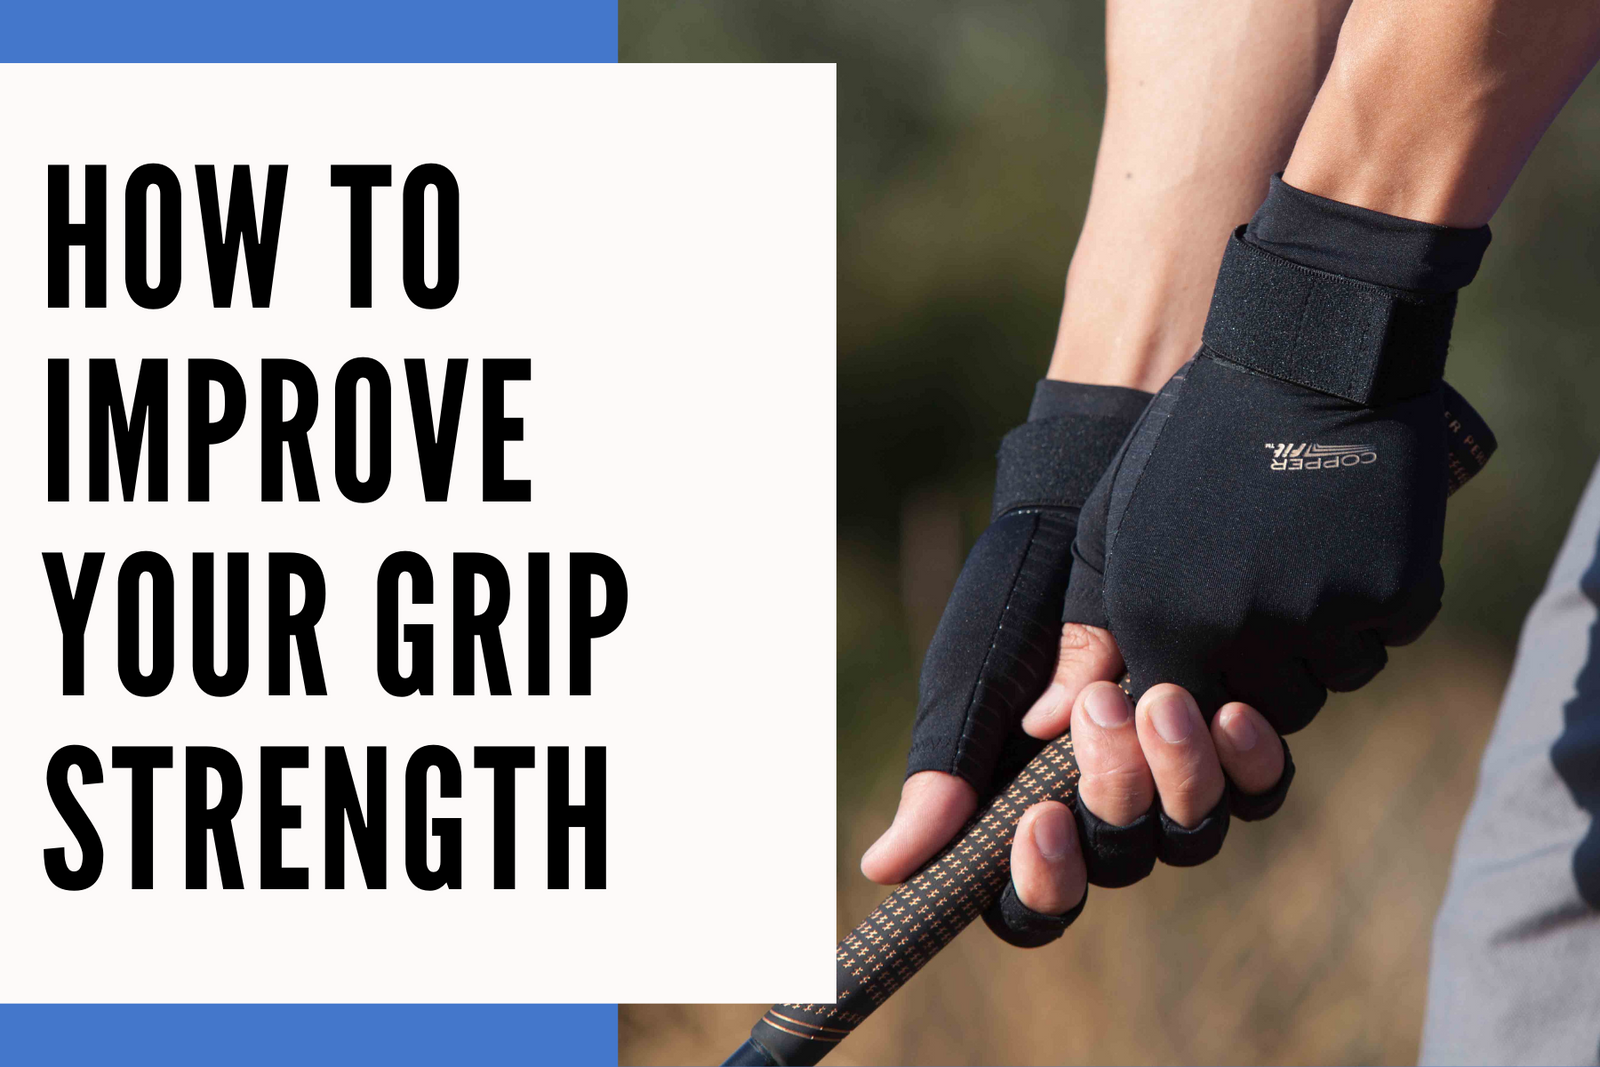 How to Improve Your Grip Strength